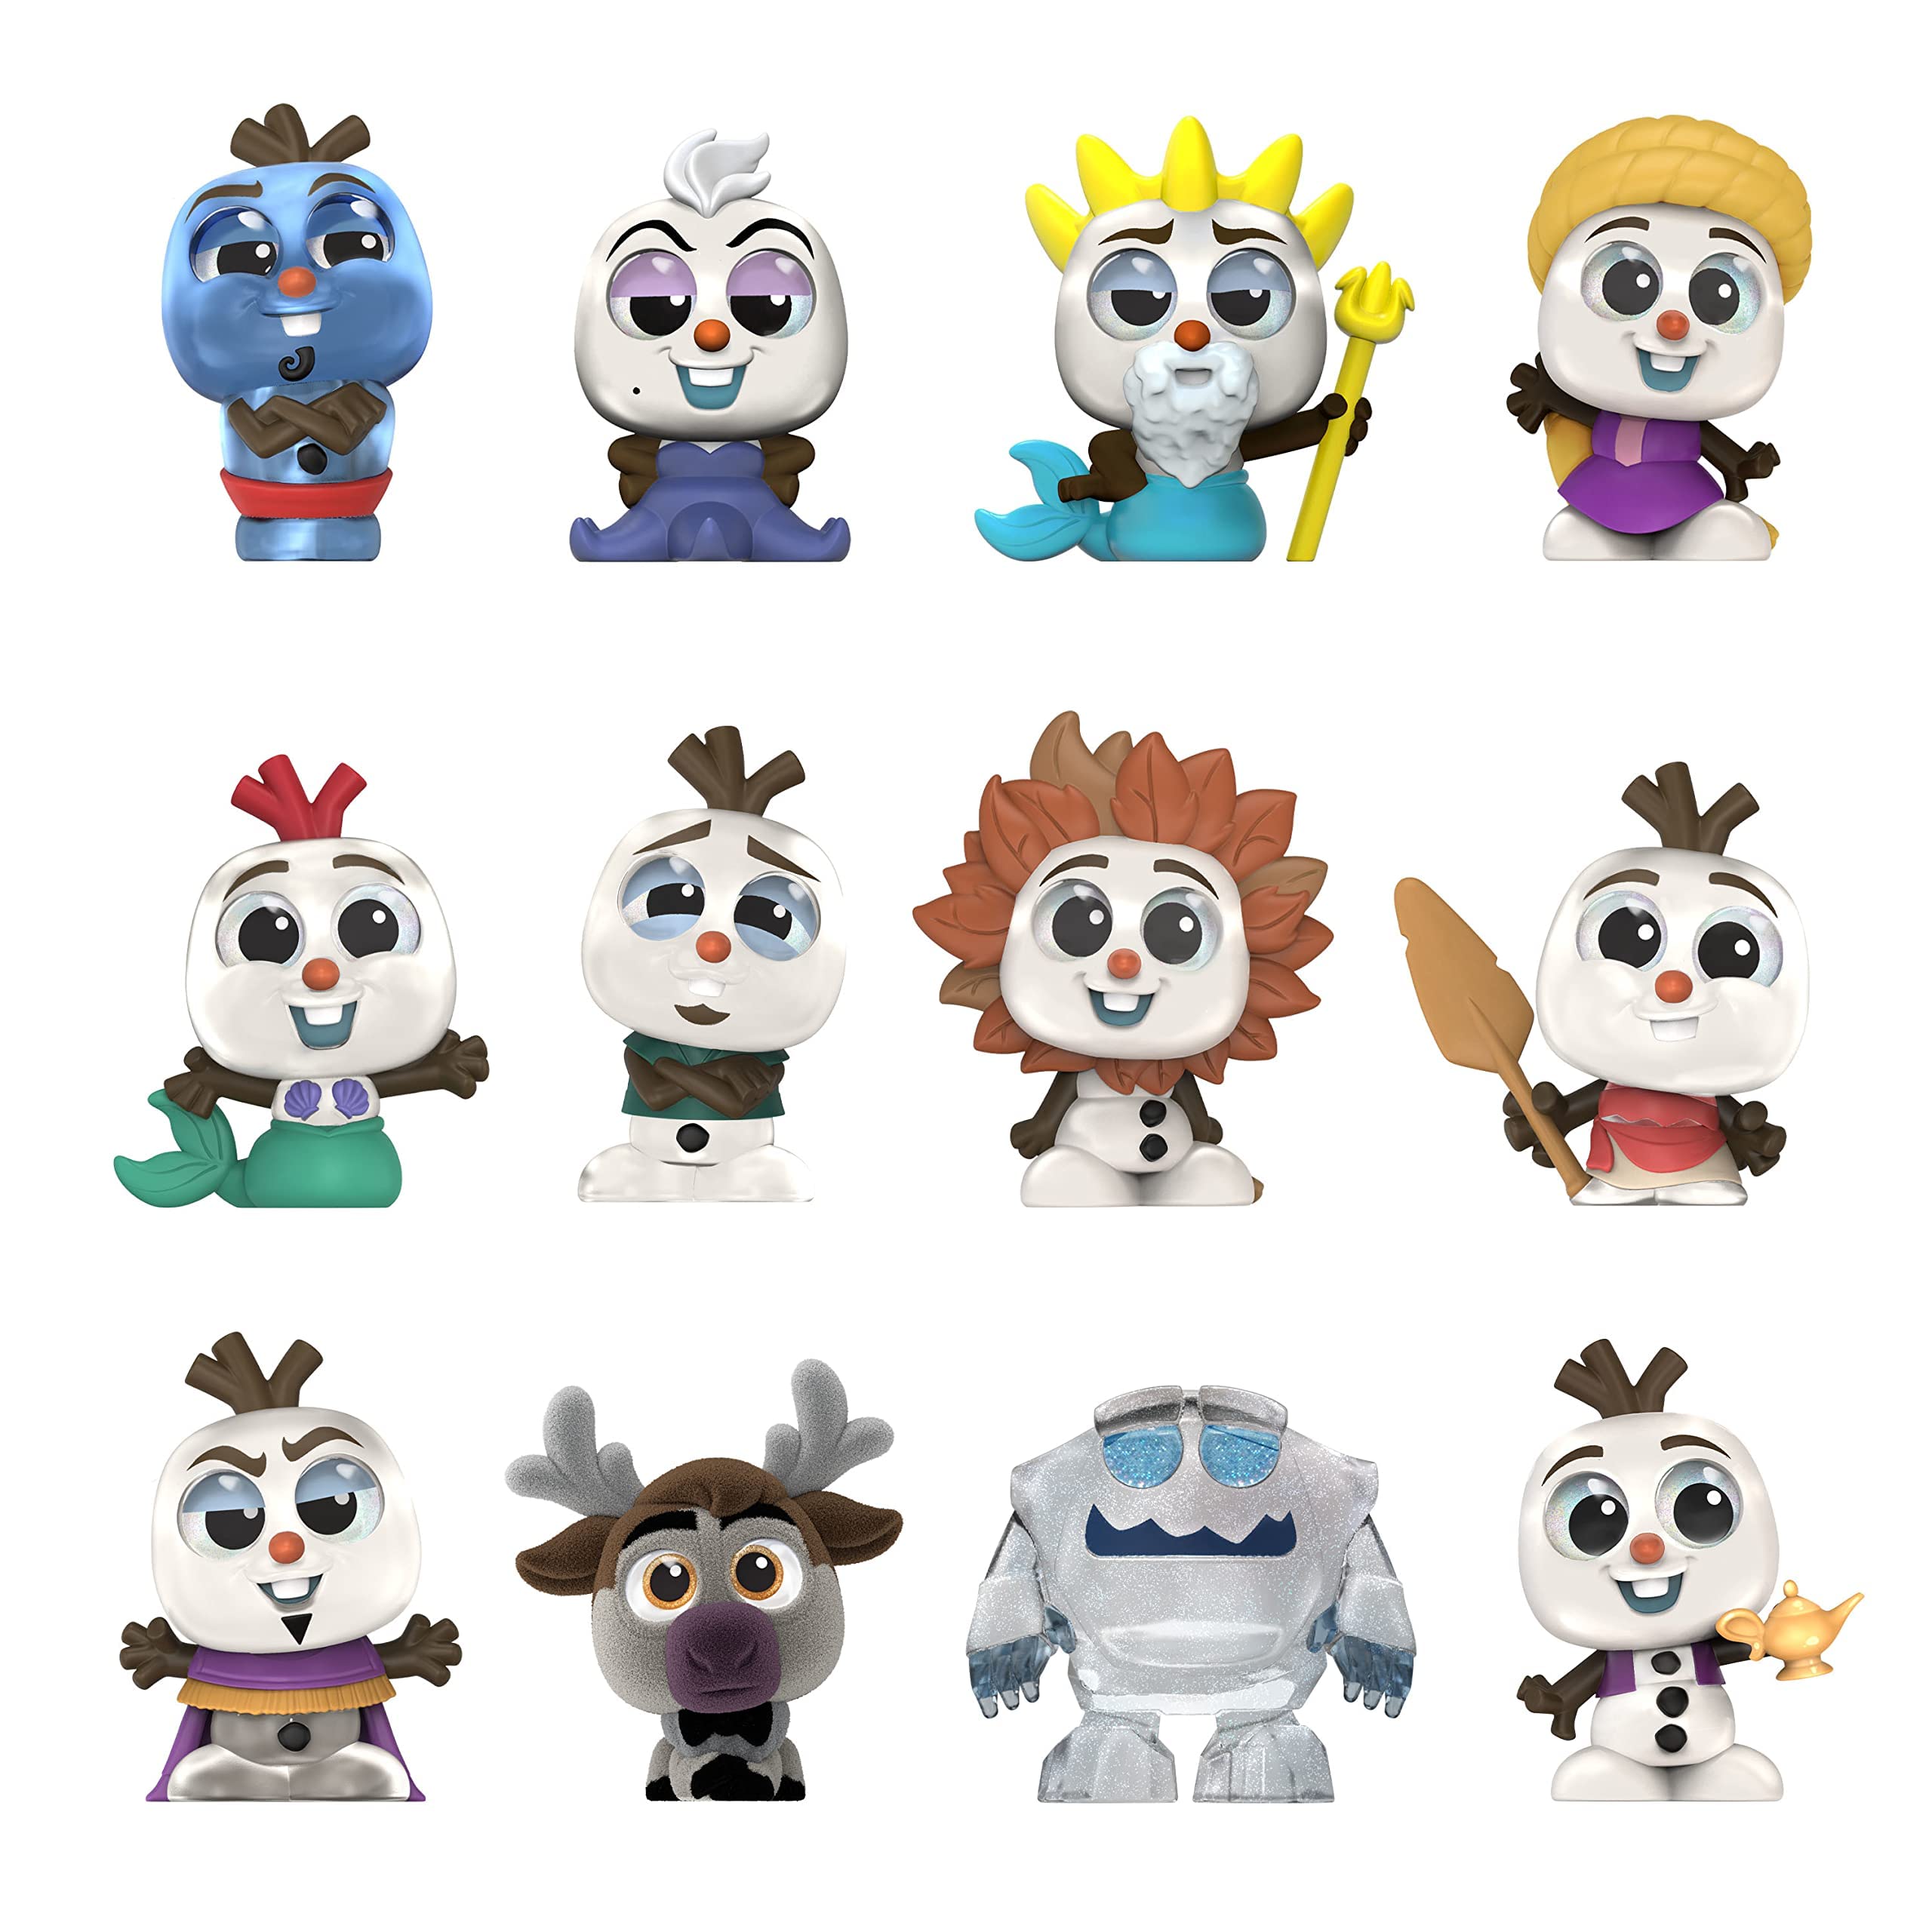 Disney Doorables Olaf Presents Collection Peek, Collectible Blind Bag Figures, Officially Licensed Kids Toys for Ages 3 Up, Gifts and Presents, Amazon Exclusive